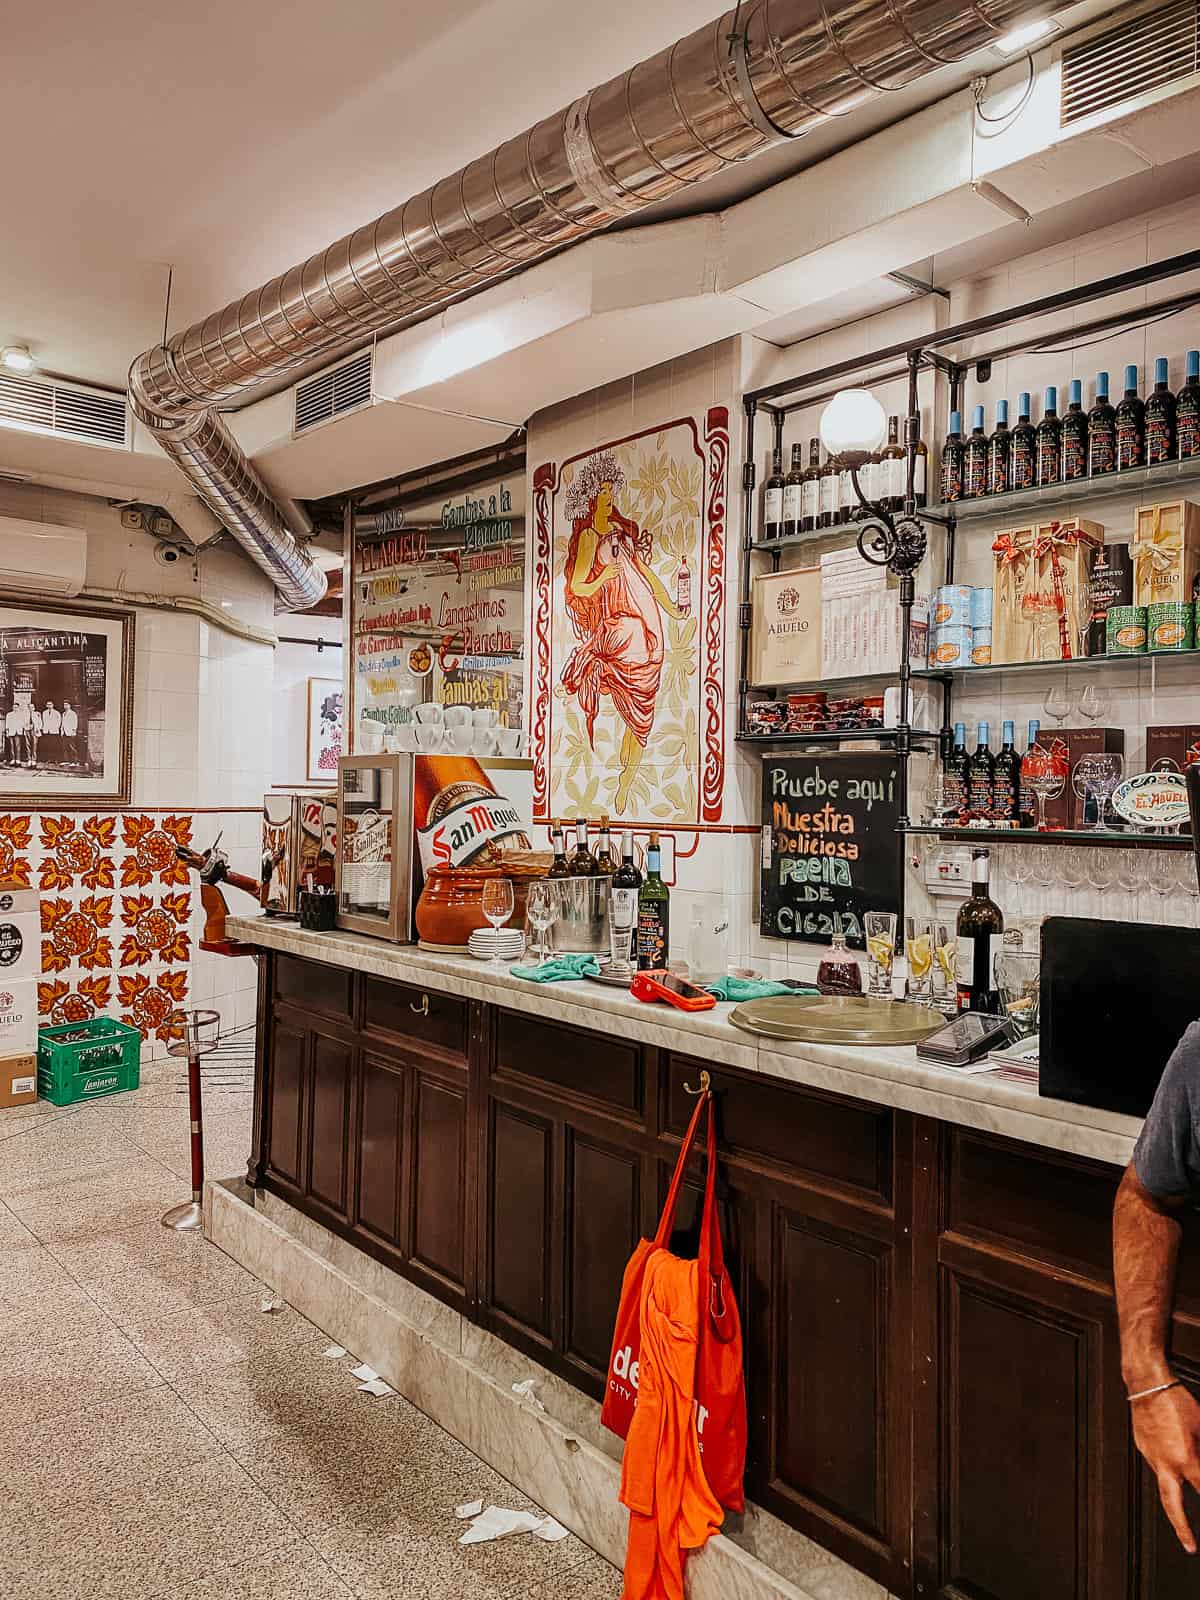 A vibrant Spanish tapas bar with traditional tiles and a large illustrated poster, showcasing a variety of local spirits and decorative red accents.